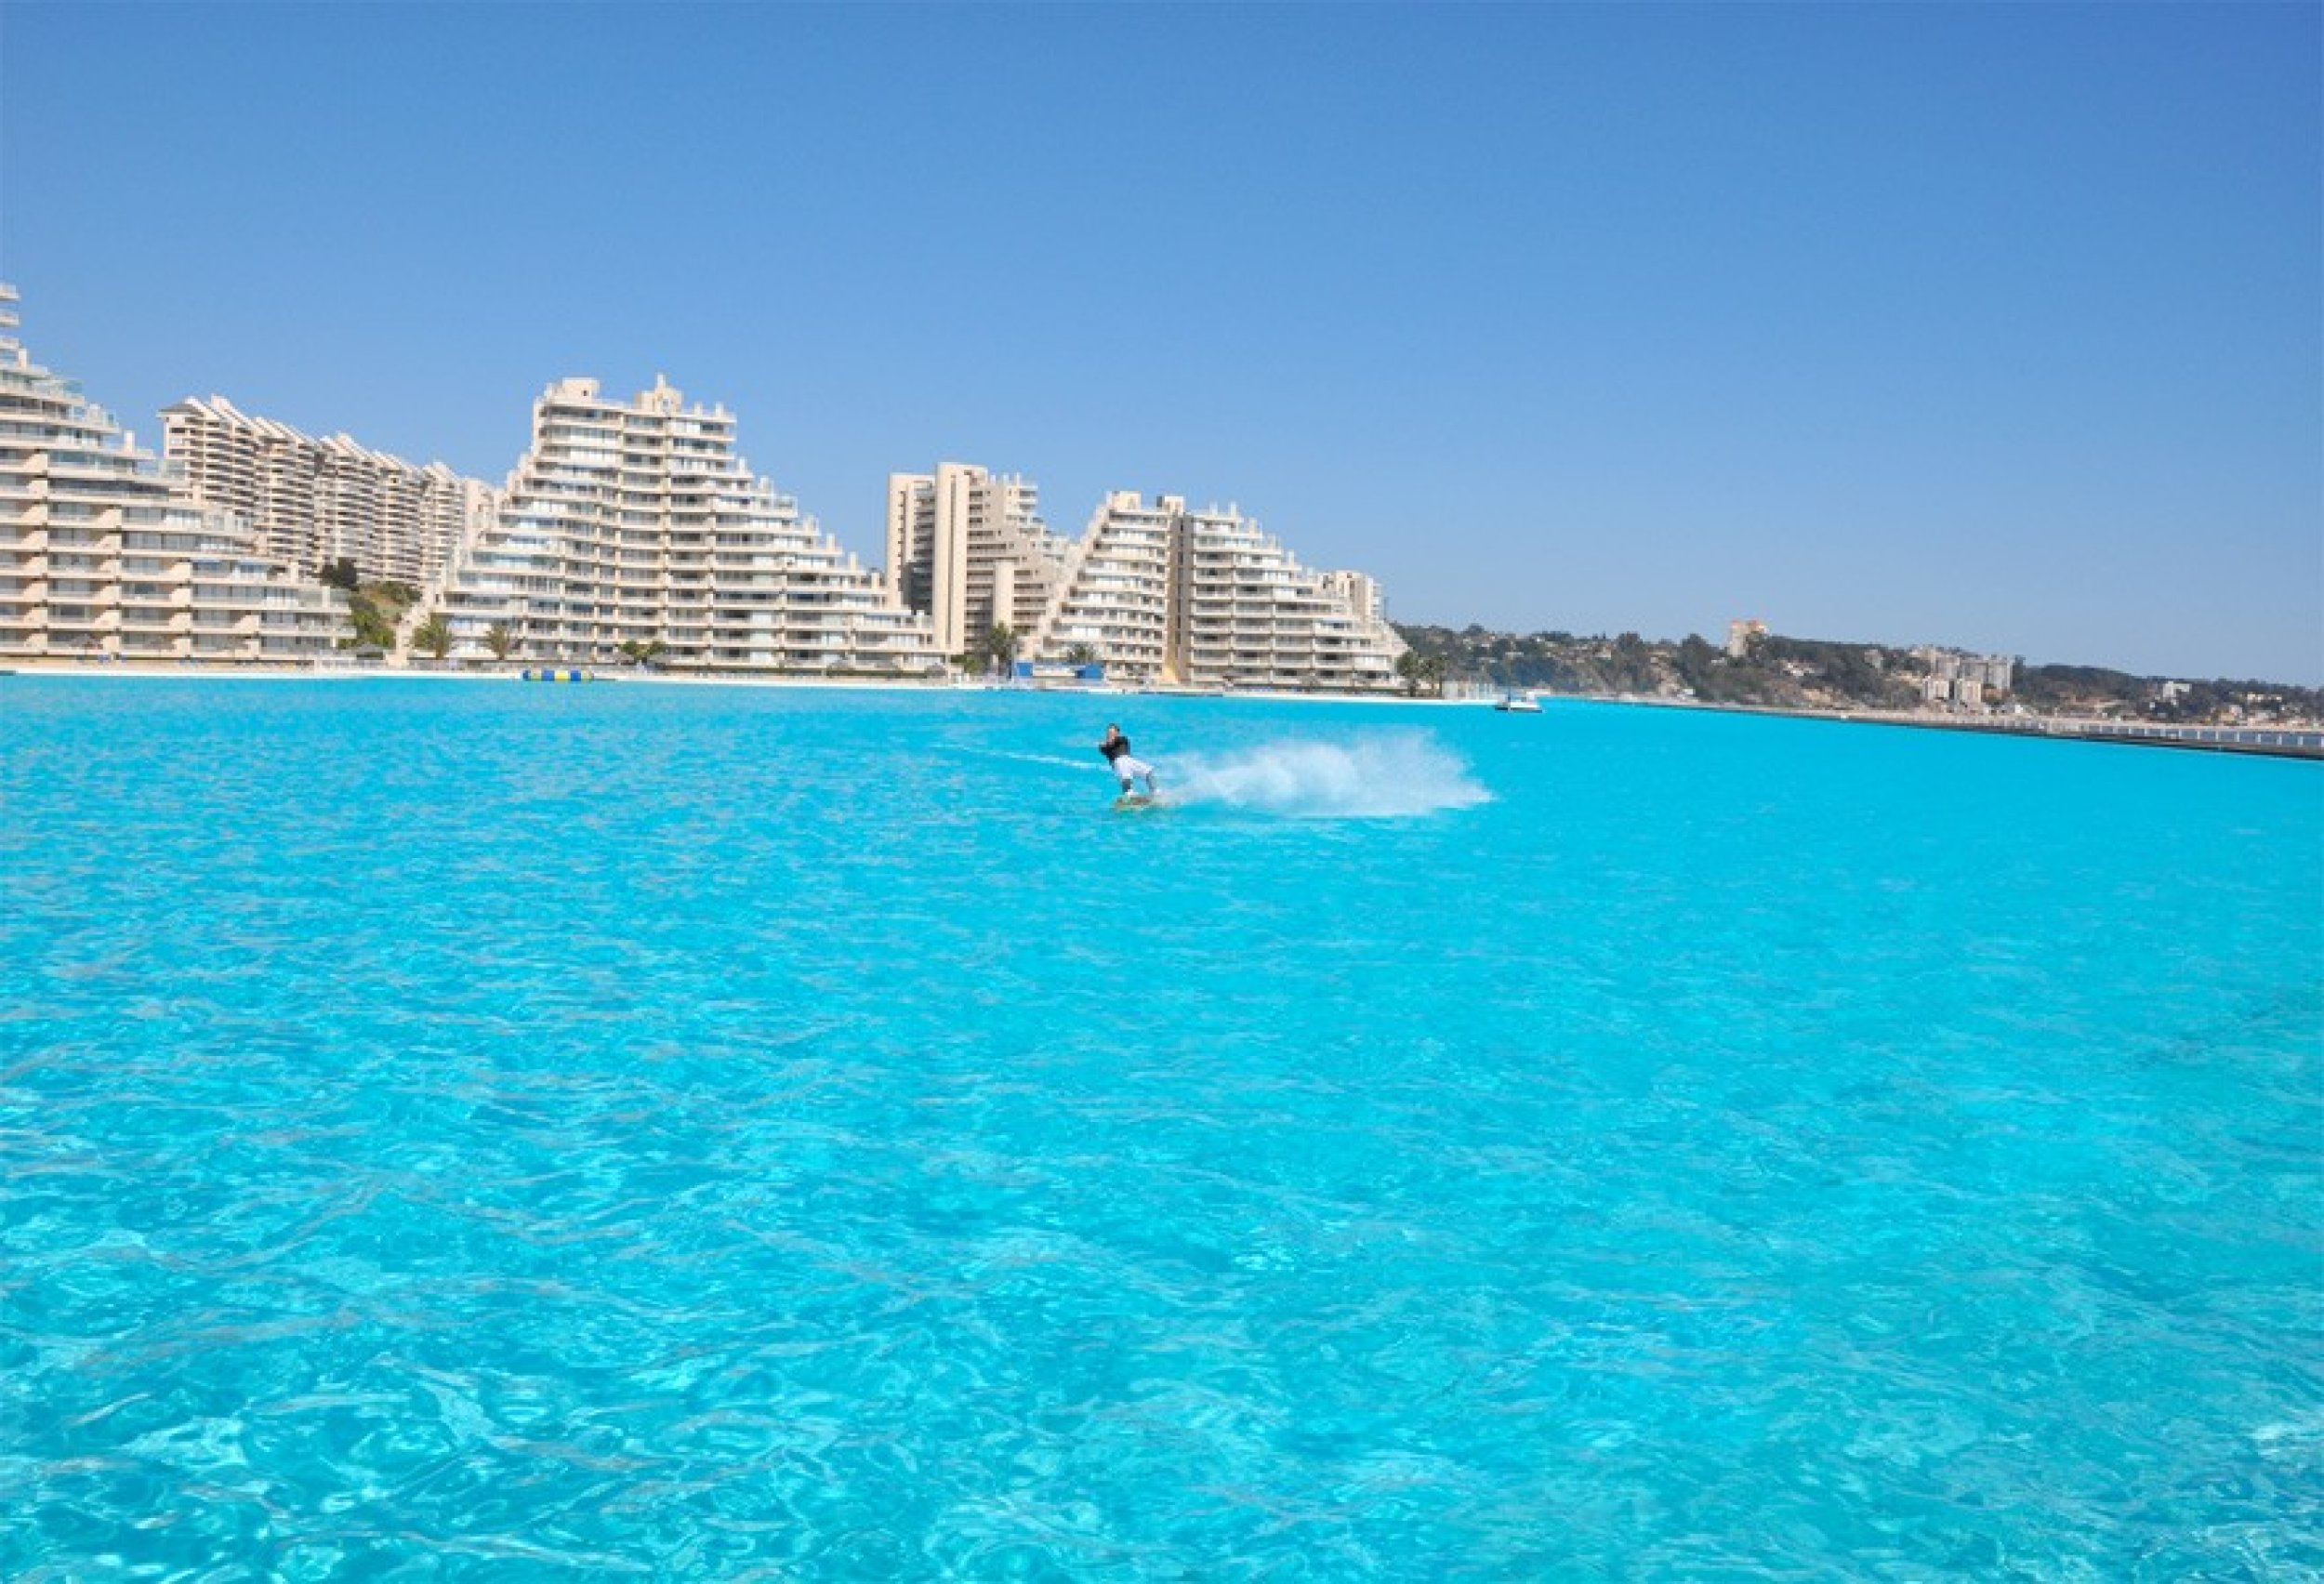 Worlds largest pool at San Alfonso del Mar resort in Chile. Photo San Alfonso del Mar